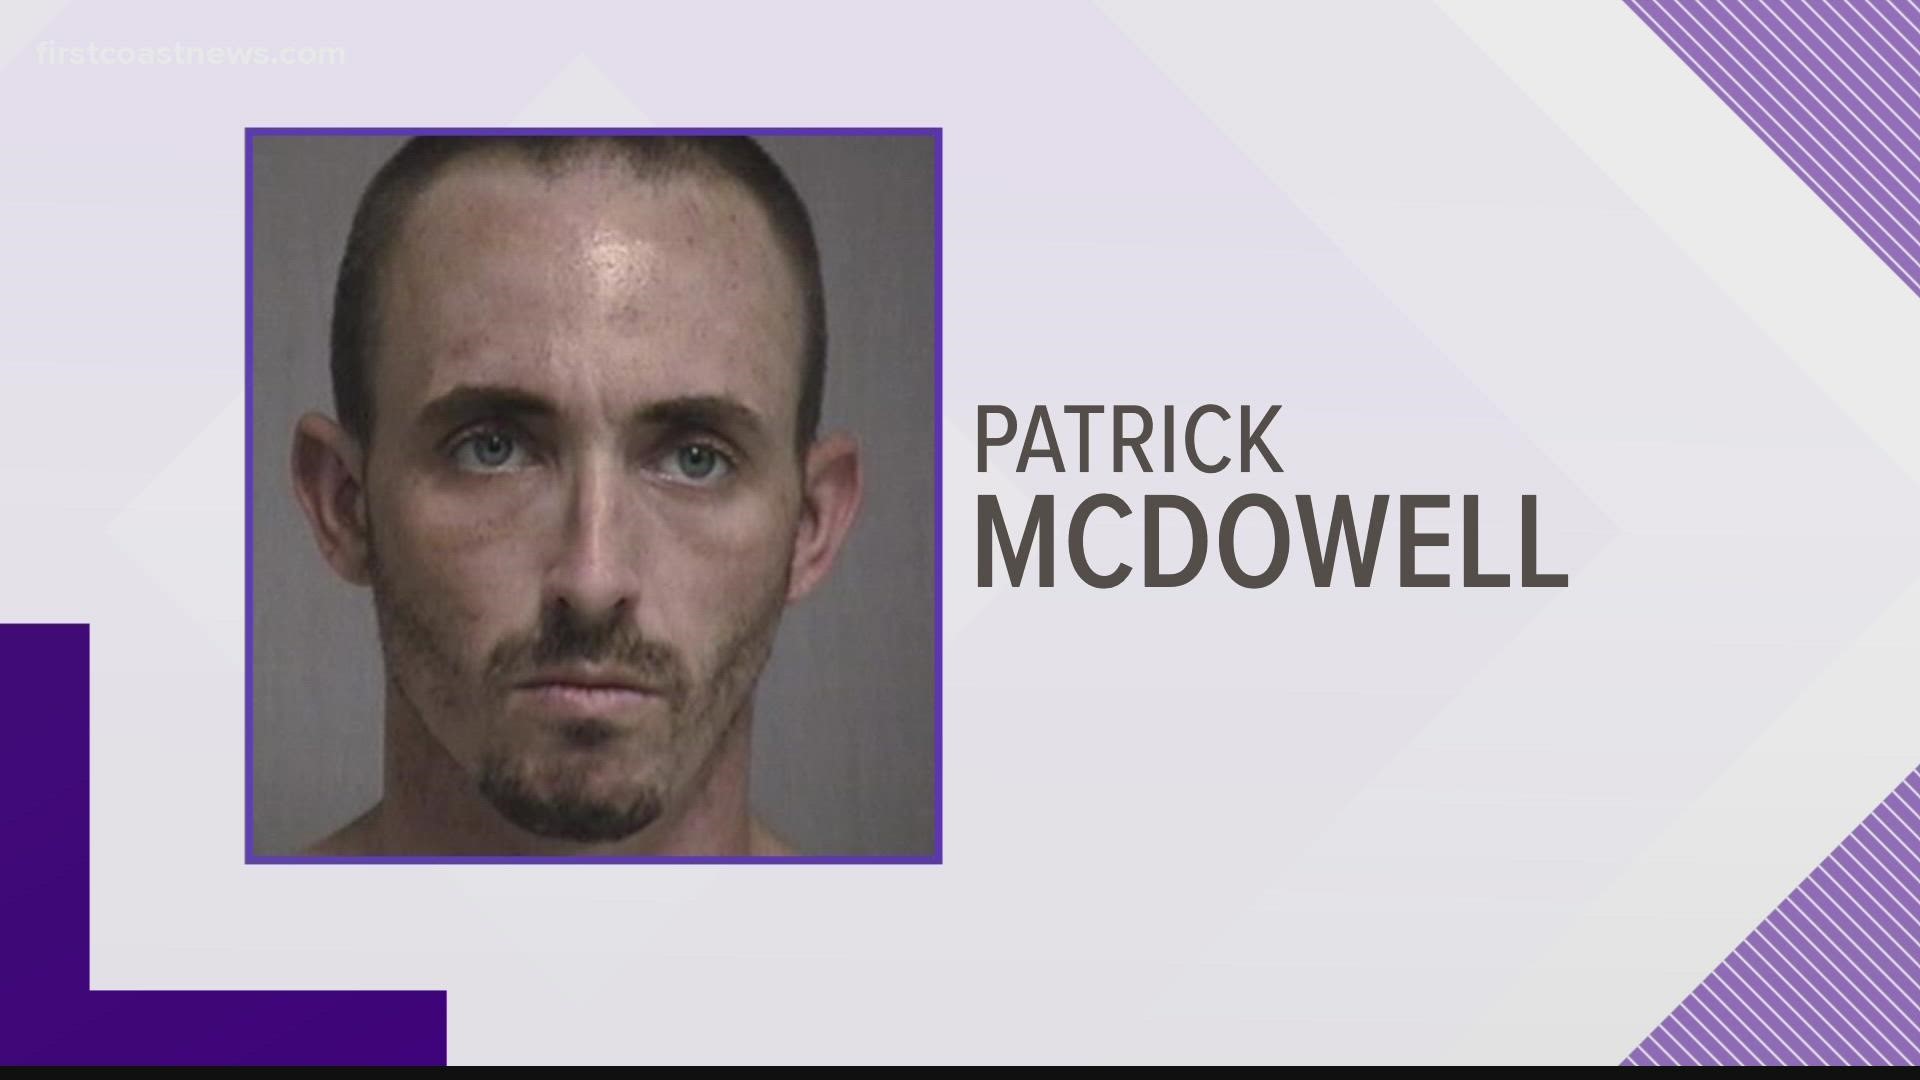 Patrick McDowell, 35, is accused of shooting the Nassau County deputy twice during a traffic stop.